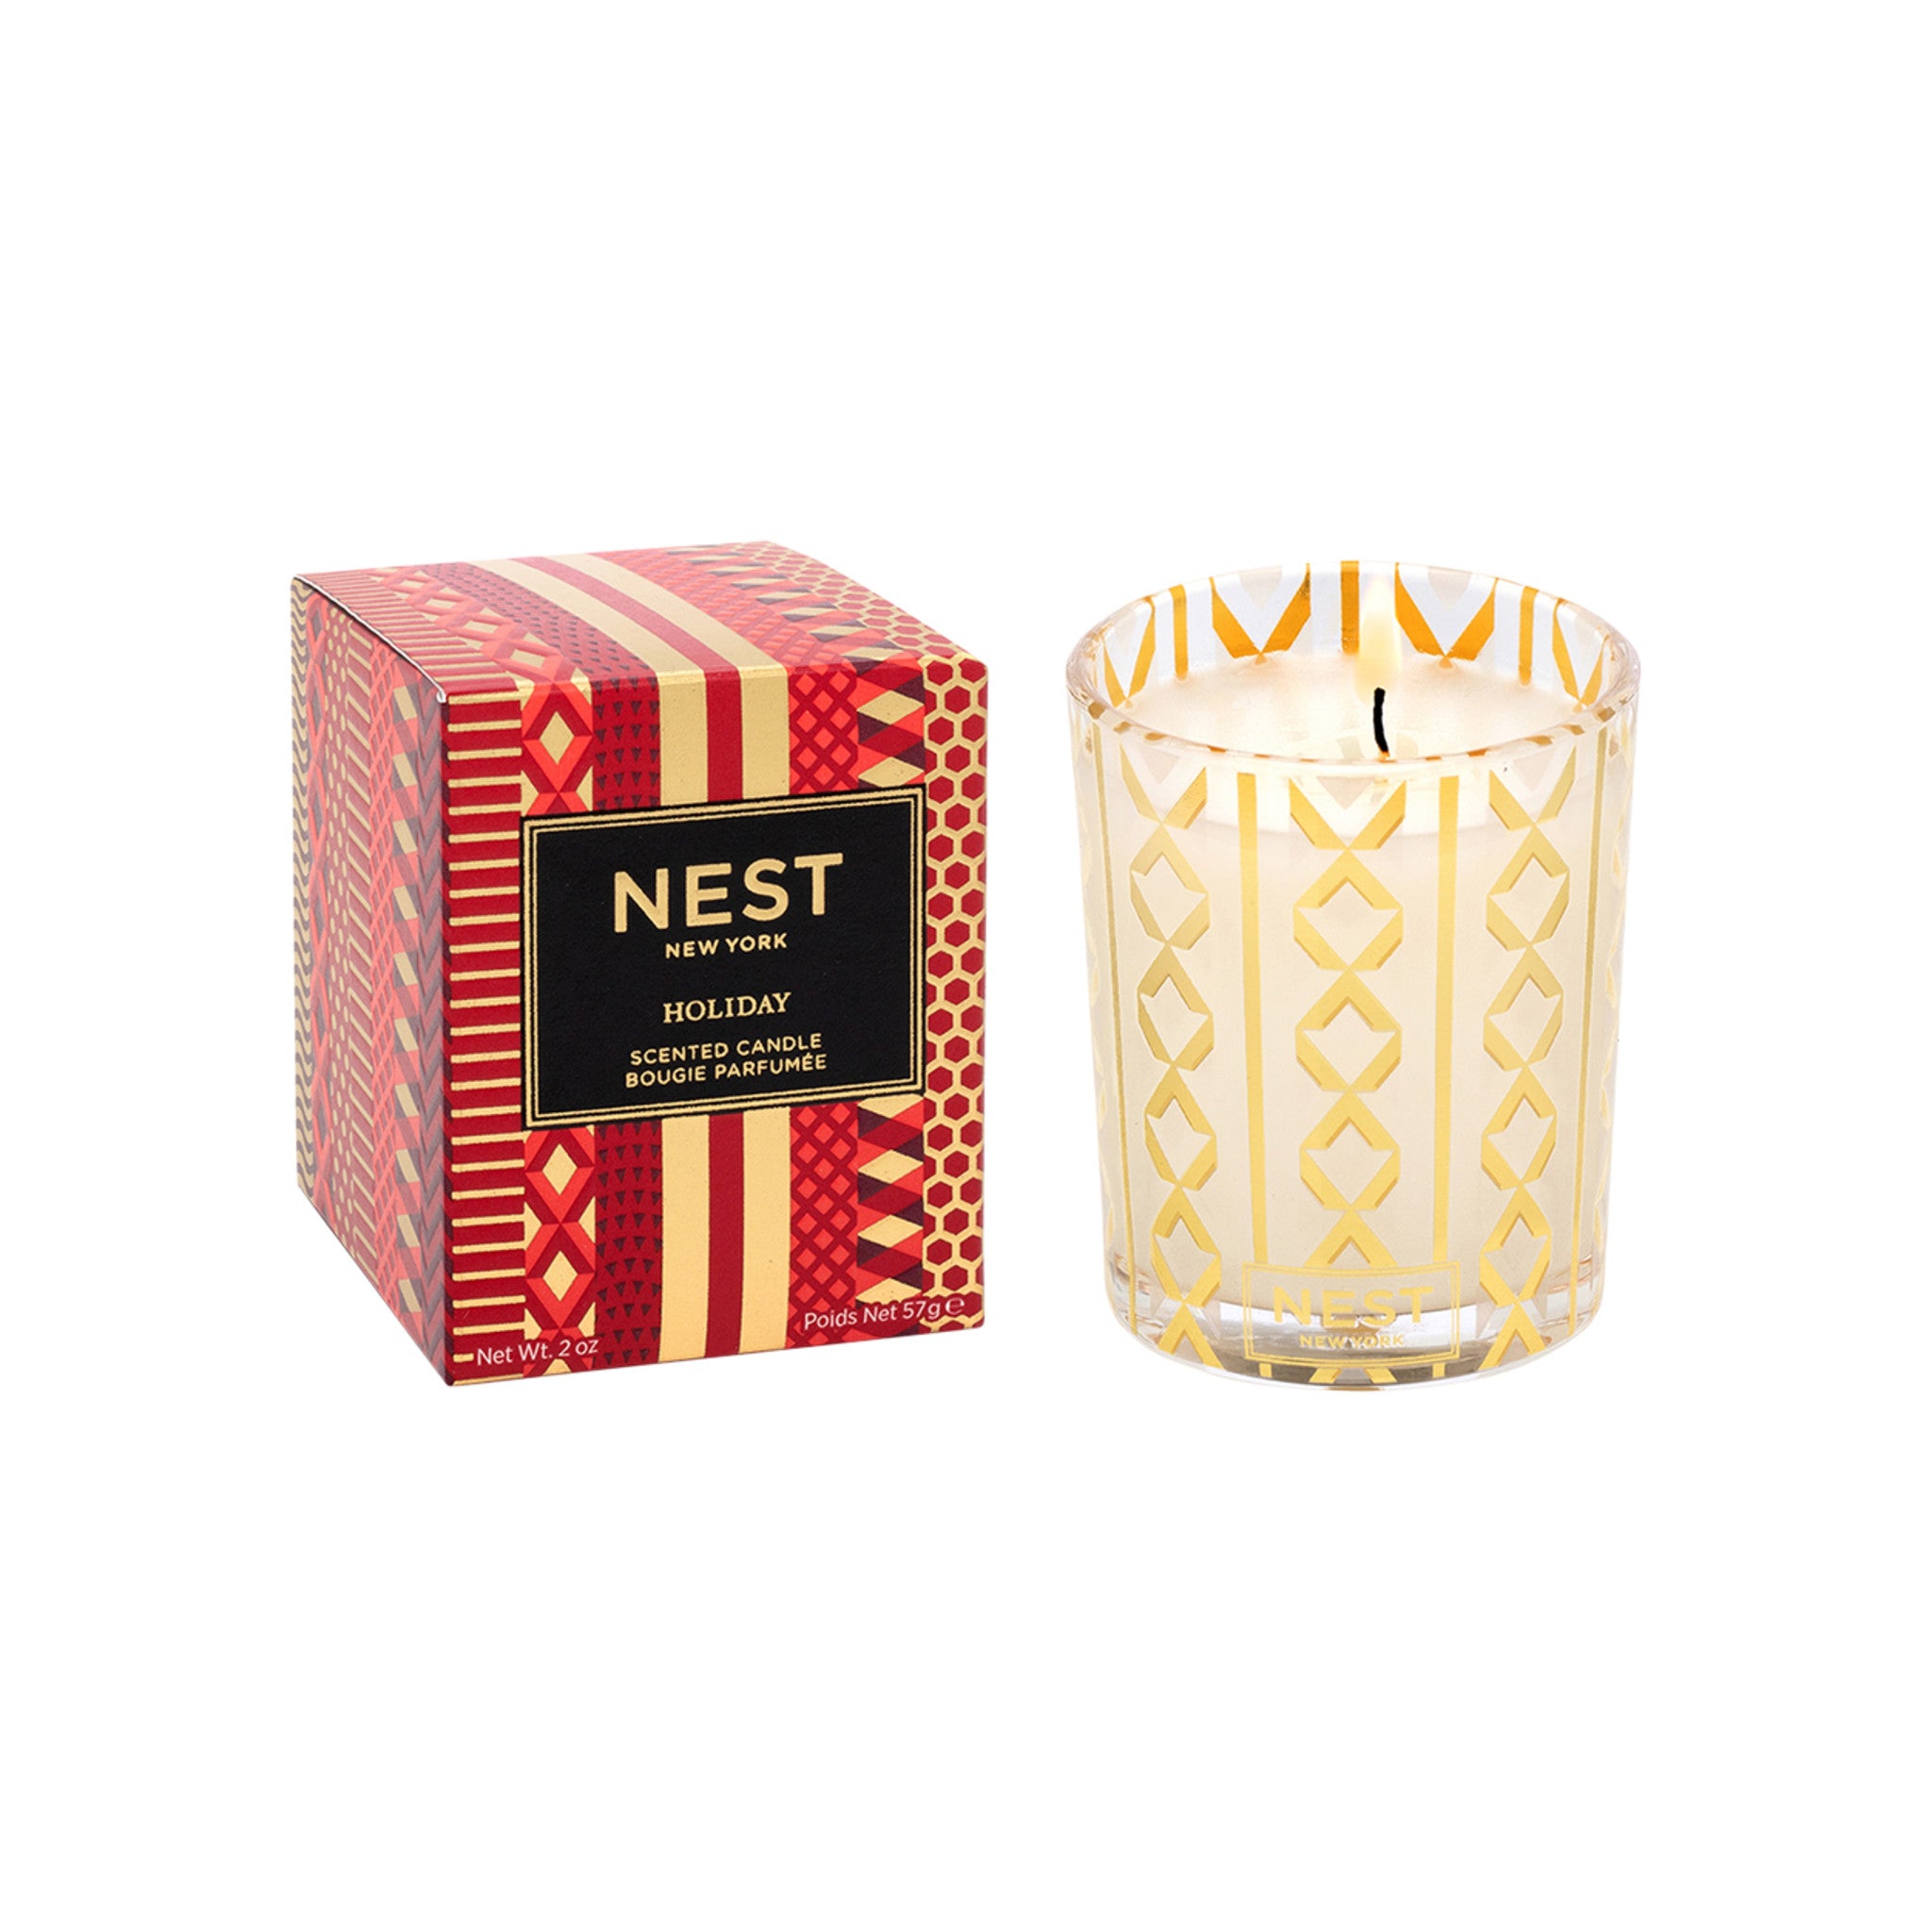 Limited edition Nest Holiday Candle (Limited Edition) Size variant: 2 oz (Votive) main image.